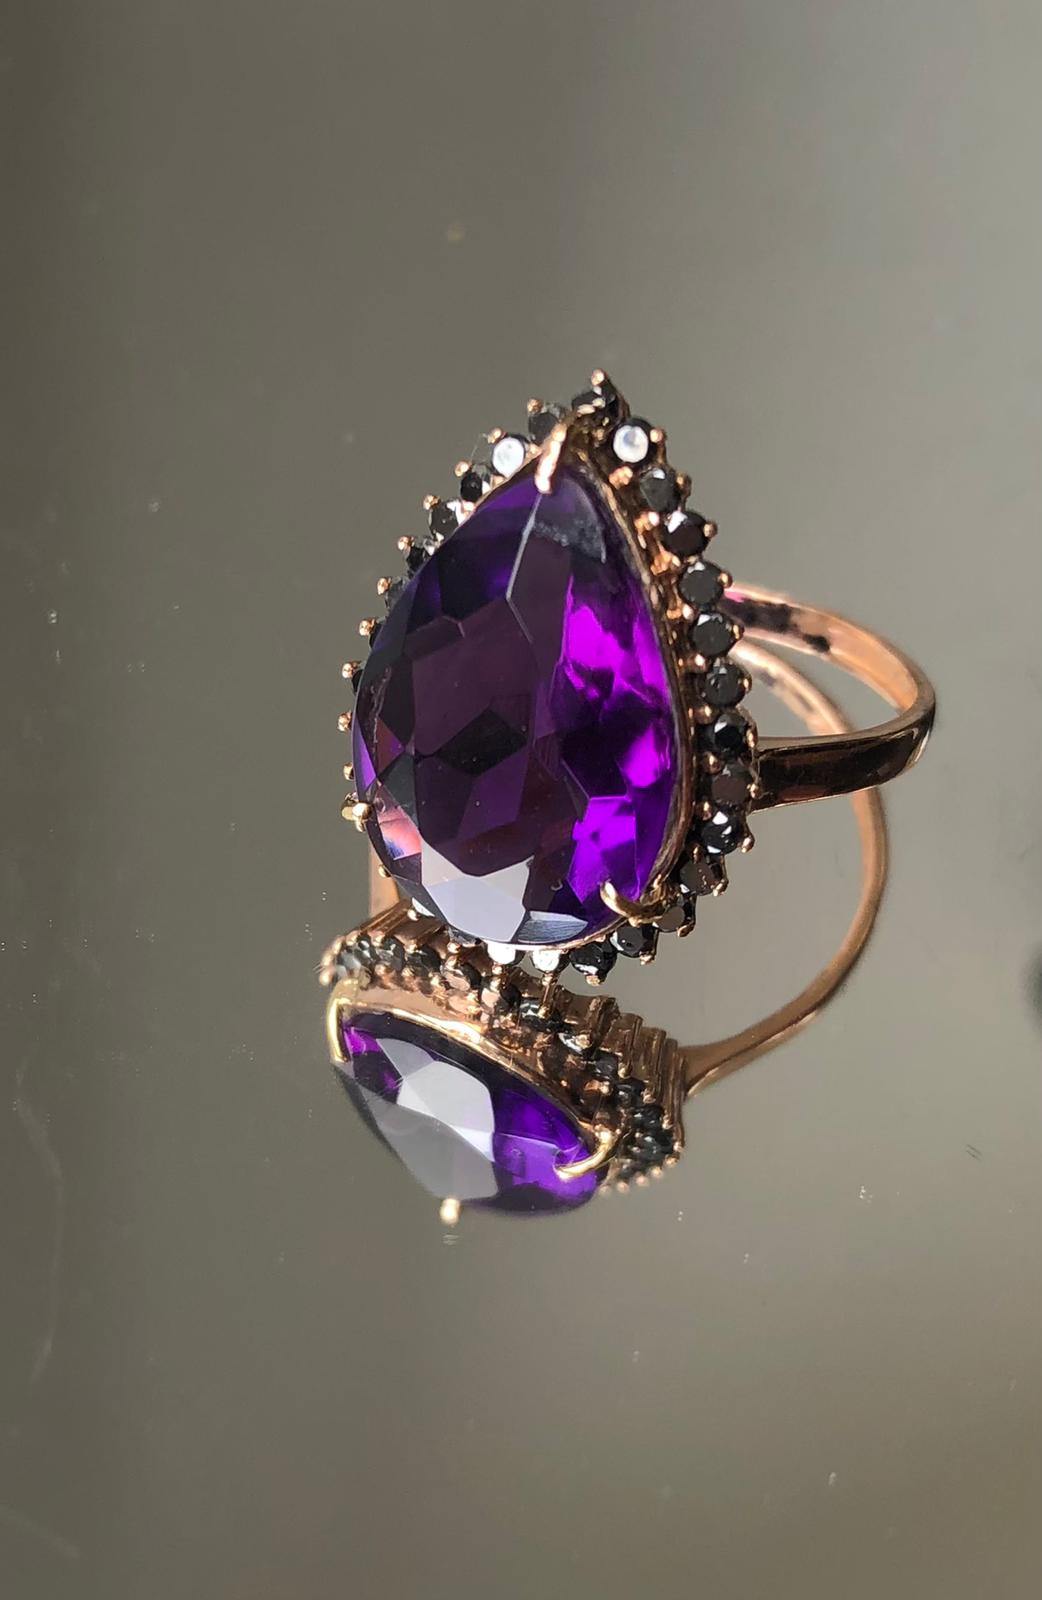 Beautiful Natural Amethyst 4.38ct With Natural Black Diamond & 18k White Gold